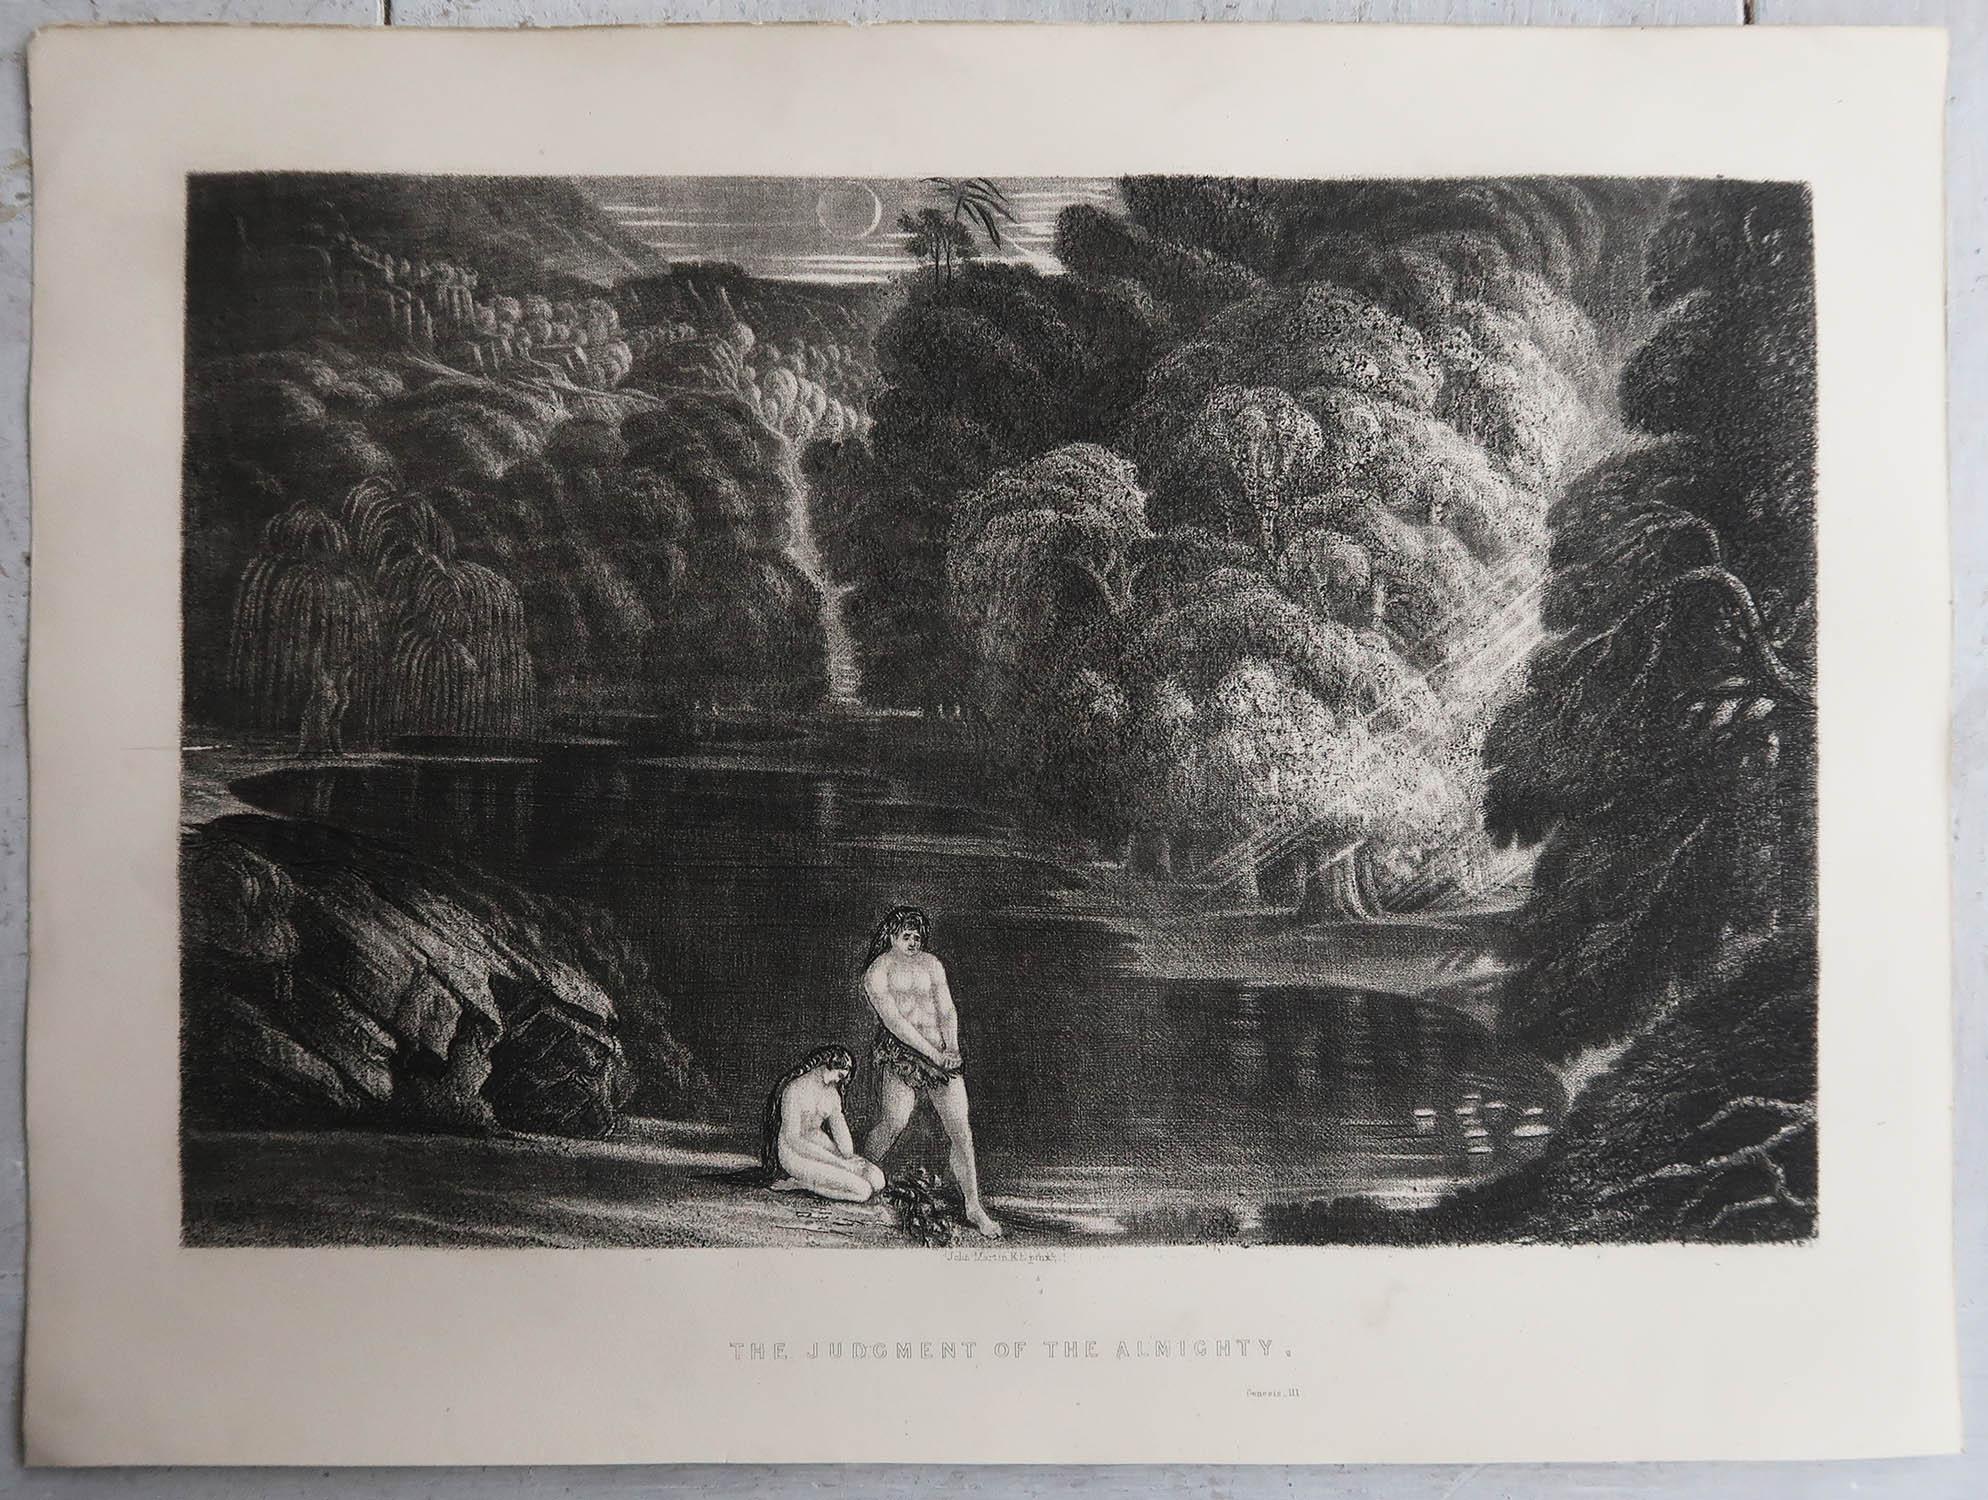 English Mezzotint by John Martin, the Judgment of the Almighty, Sangster, circa 1850 For Sale